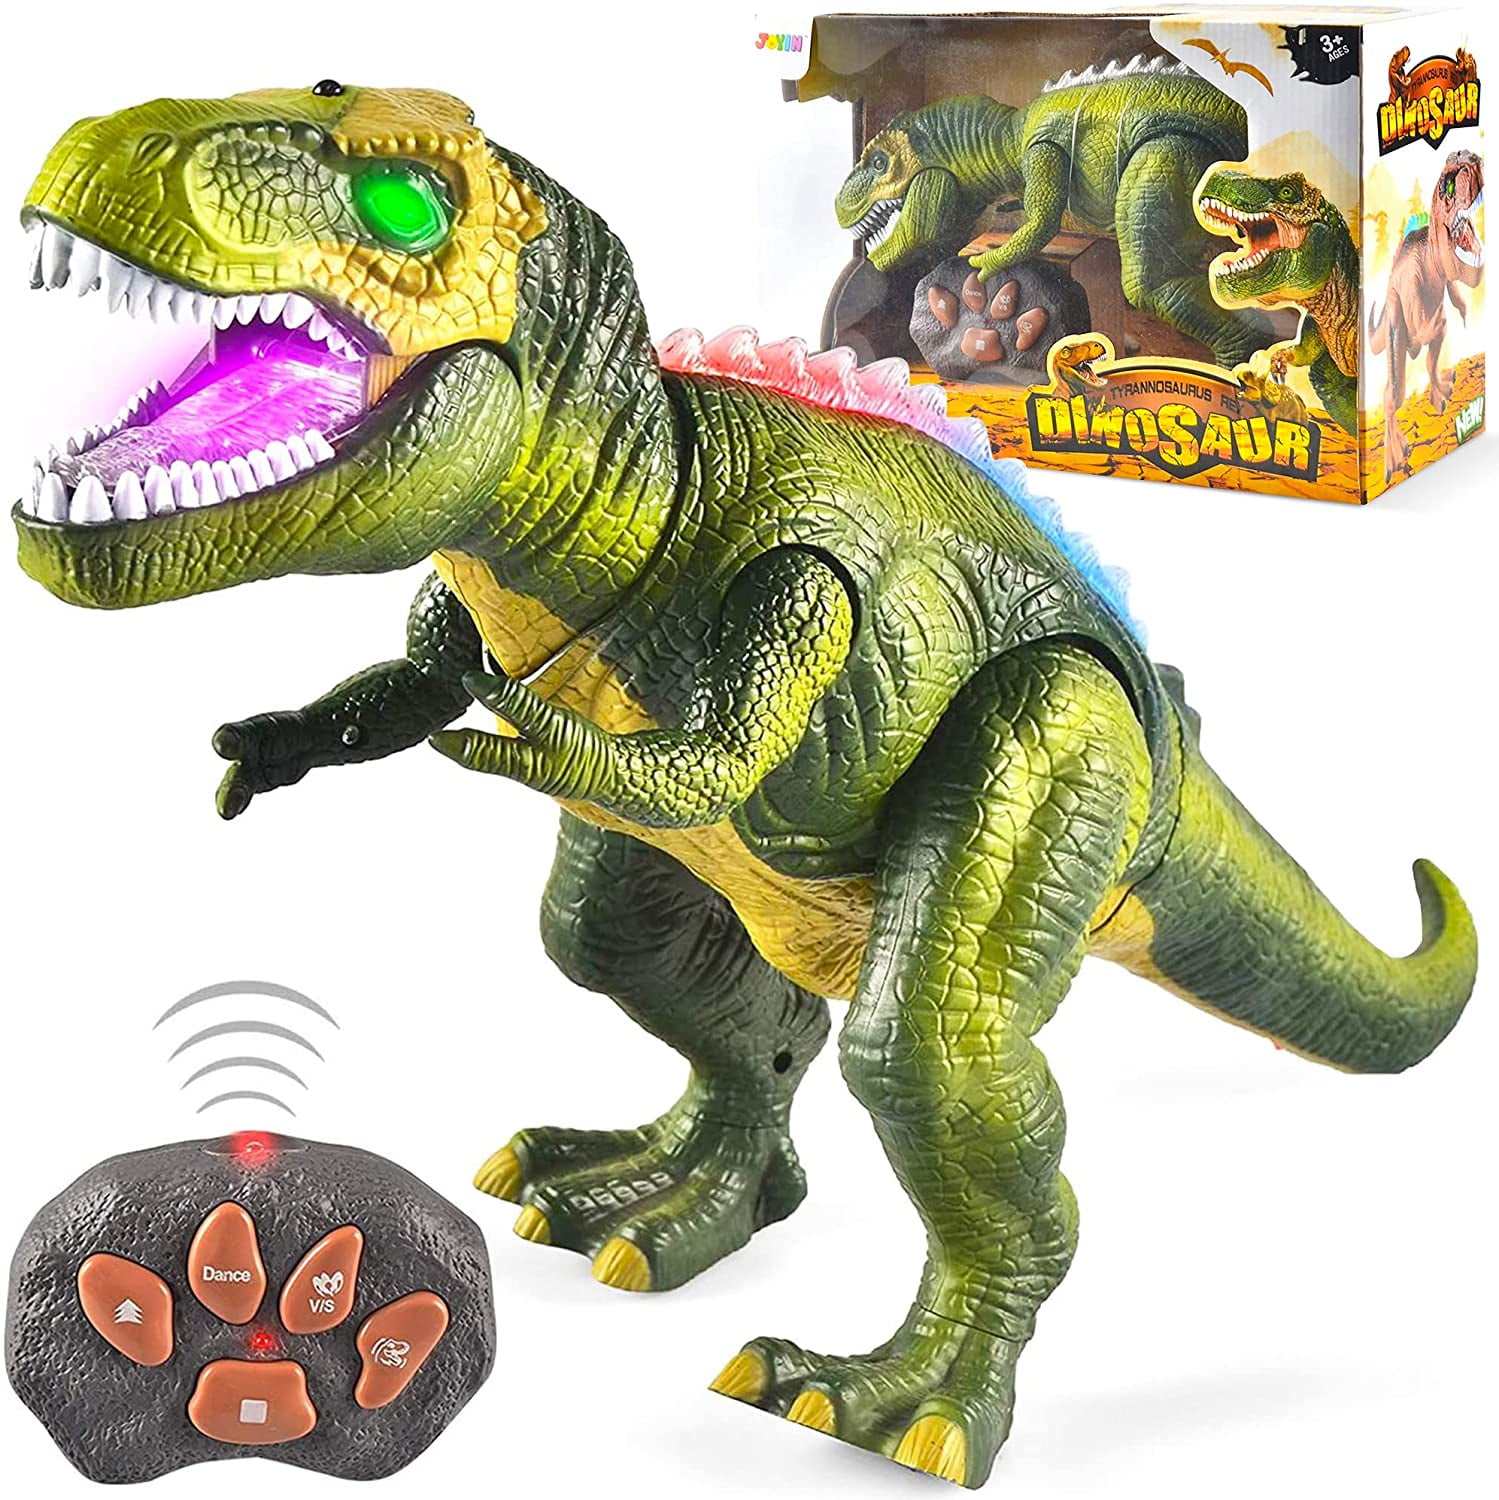 Adventure Force 87412 Radio Controlled T-Rex Dinosaur Toy for sale online 